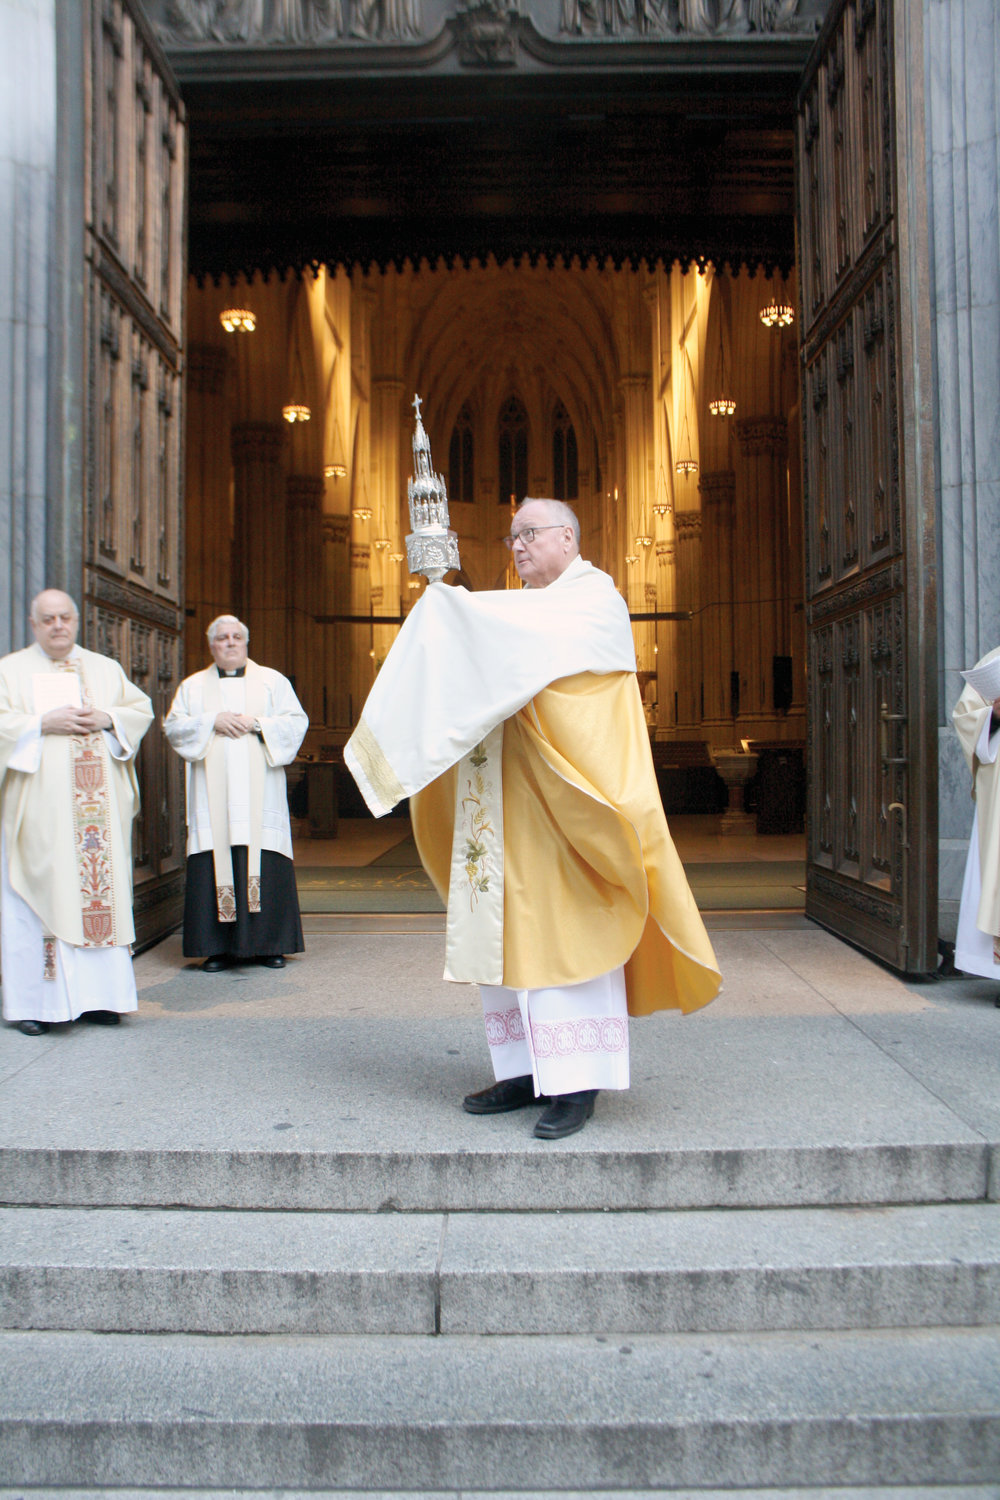 Cardinal Dolan, from the steps of the cathedral facing Fifth Avenue, blesses New York City with the Blessed Sacrament on Holy Thursday, April 9.